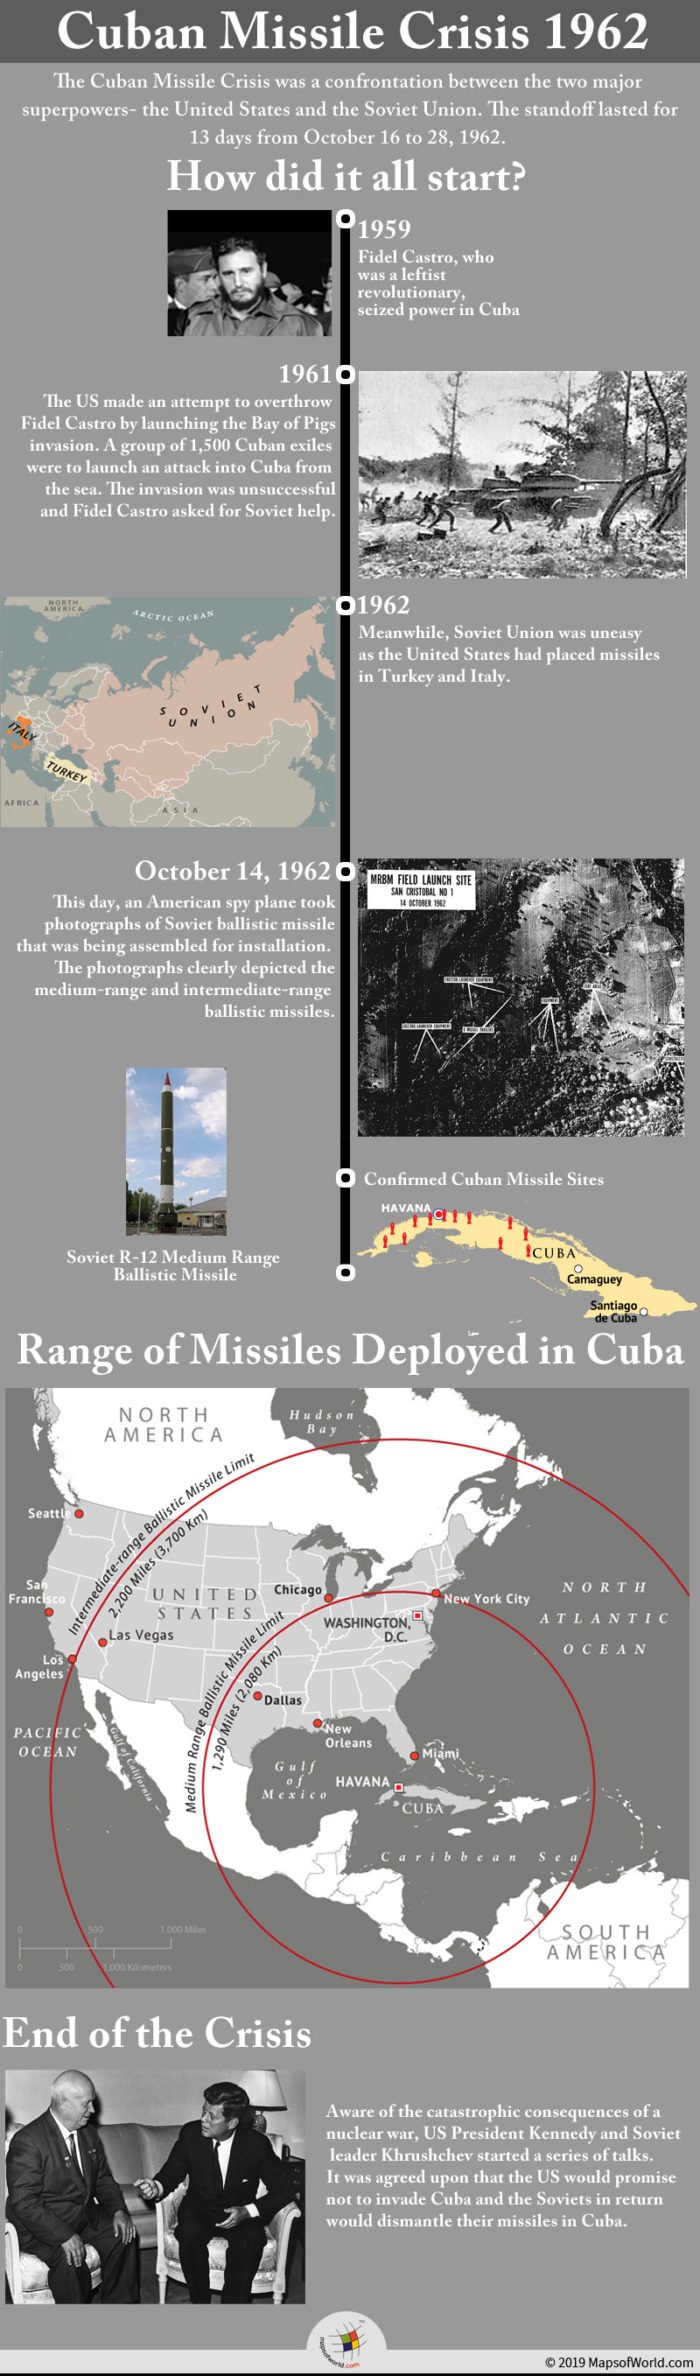 Infographic Showing Details of 1962 Cuban Missile Crisis